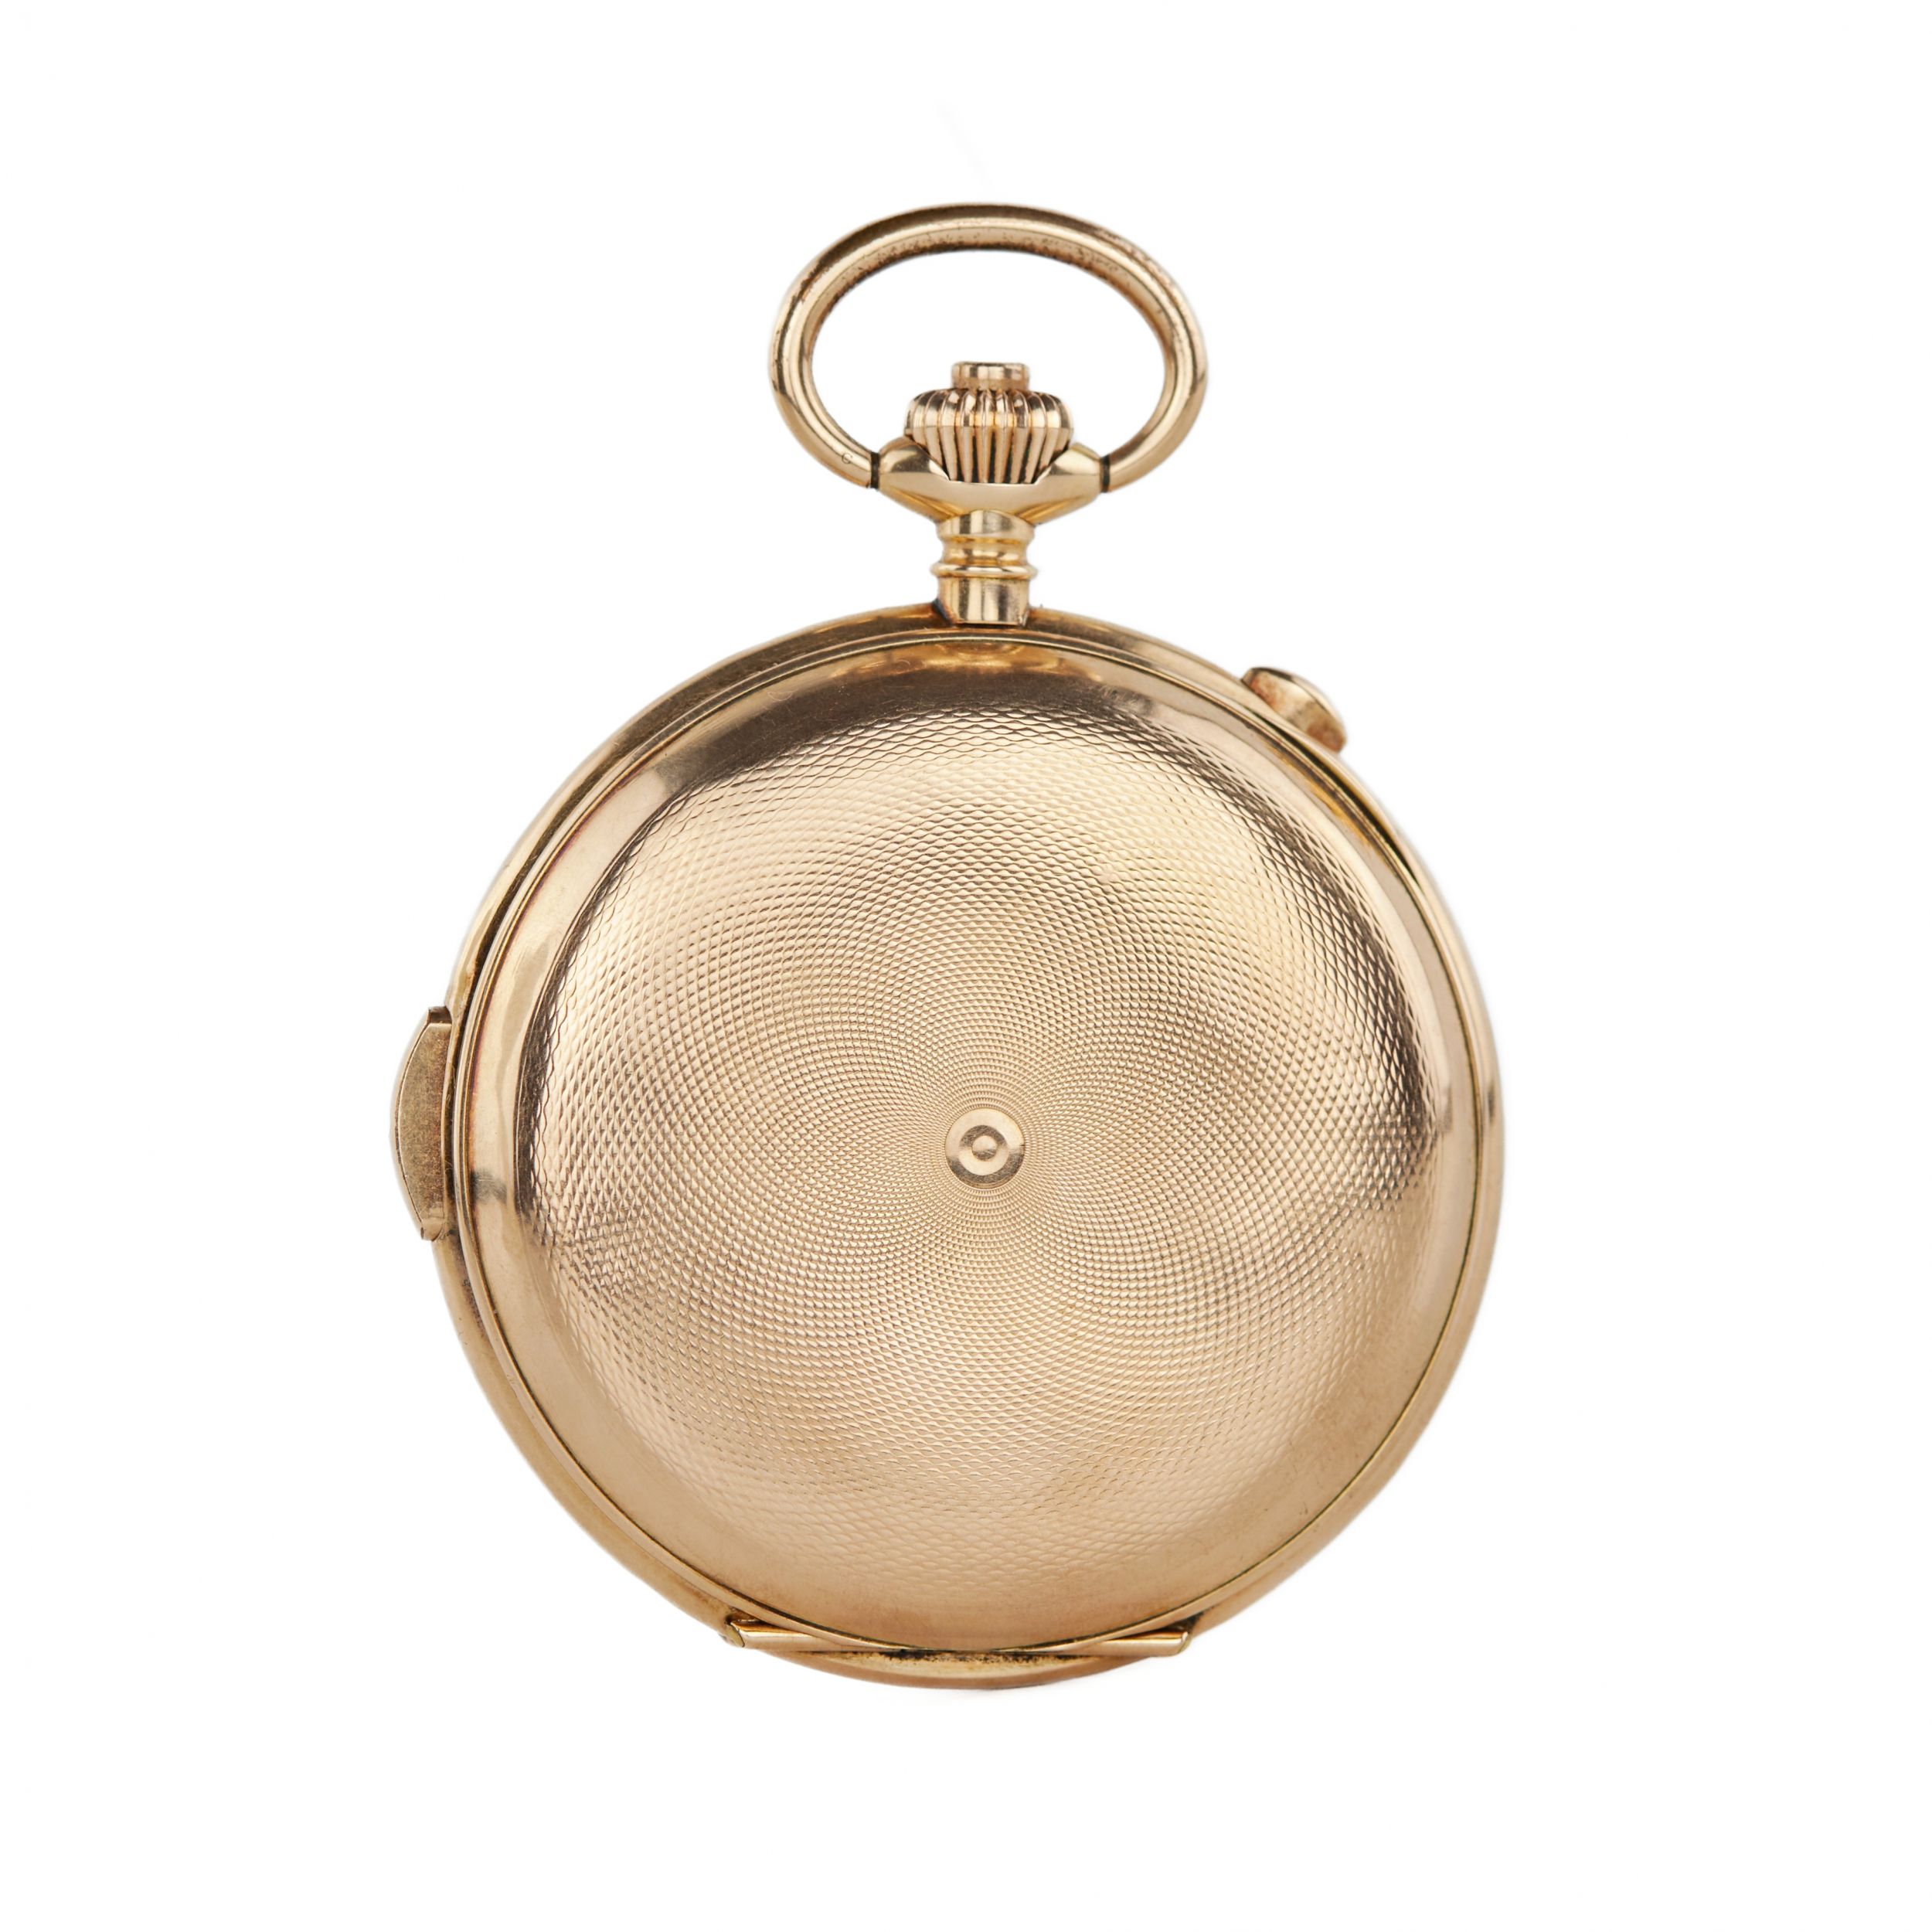 Heures Repetition Quarts Taschenuhr Chronographe 14k Gold Pocket Watch - Image 4 of 11